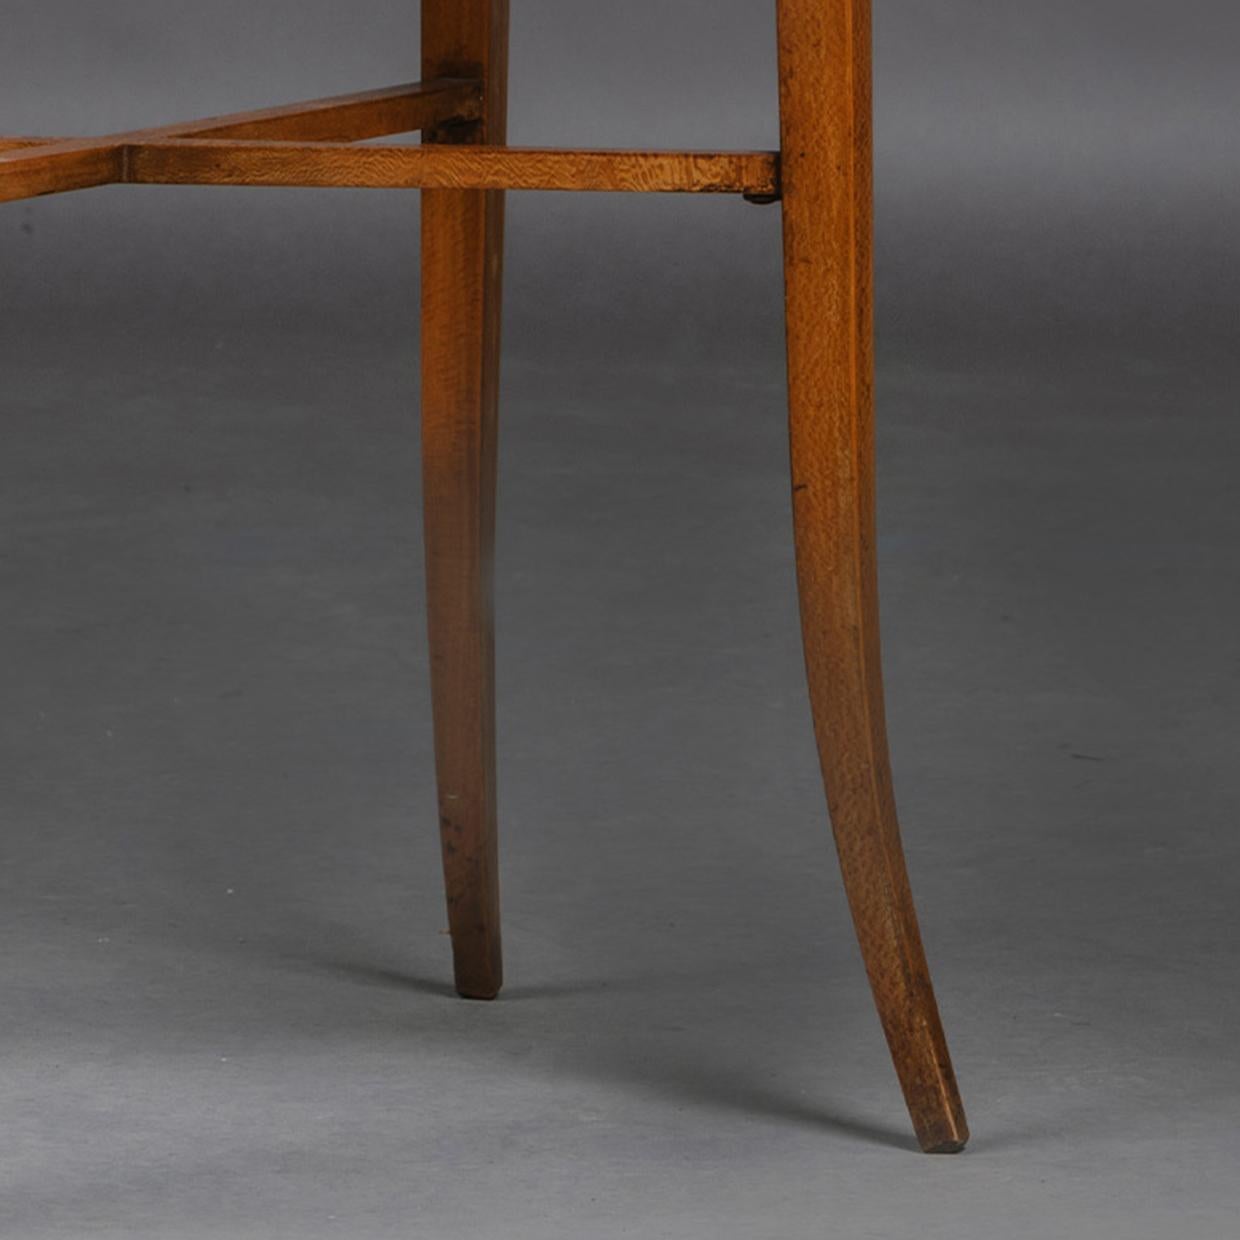 A Biedermeier Satin Birch Occasional Table In Good Condition For Sale In Brighton, West Sussex